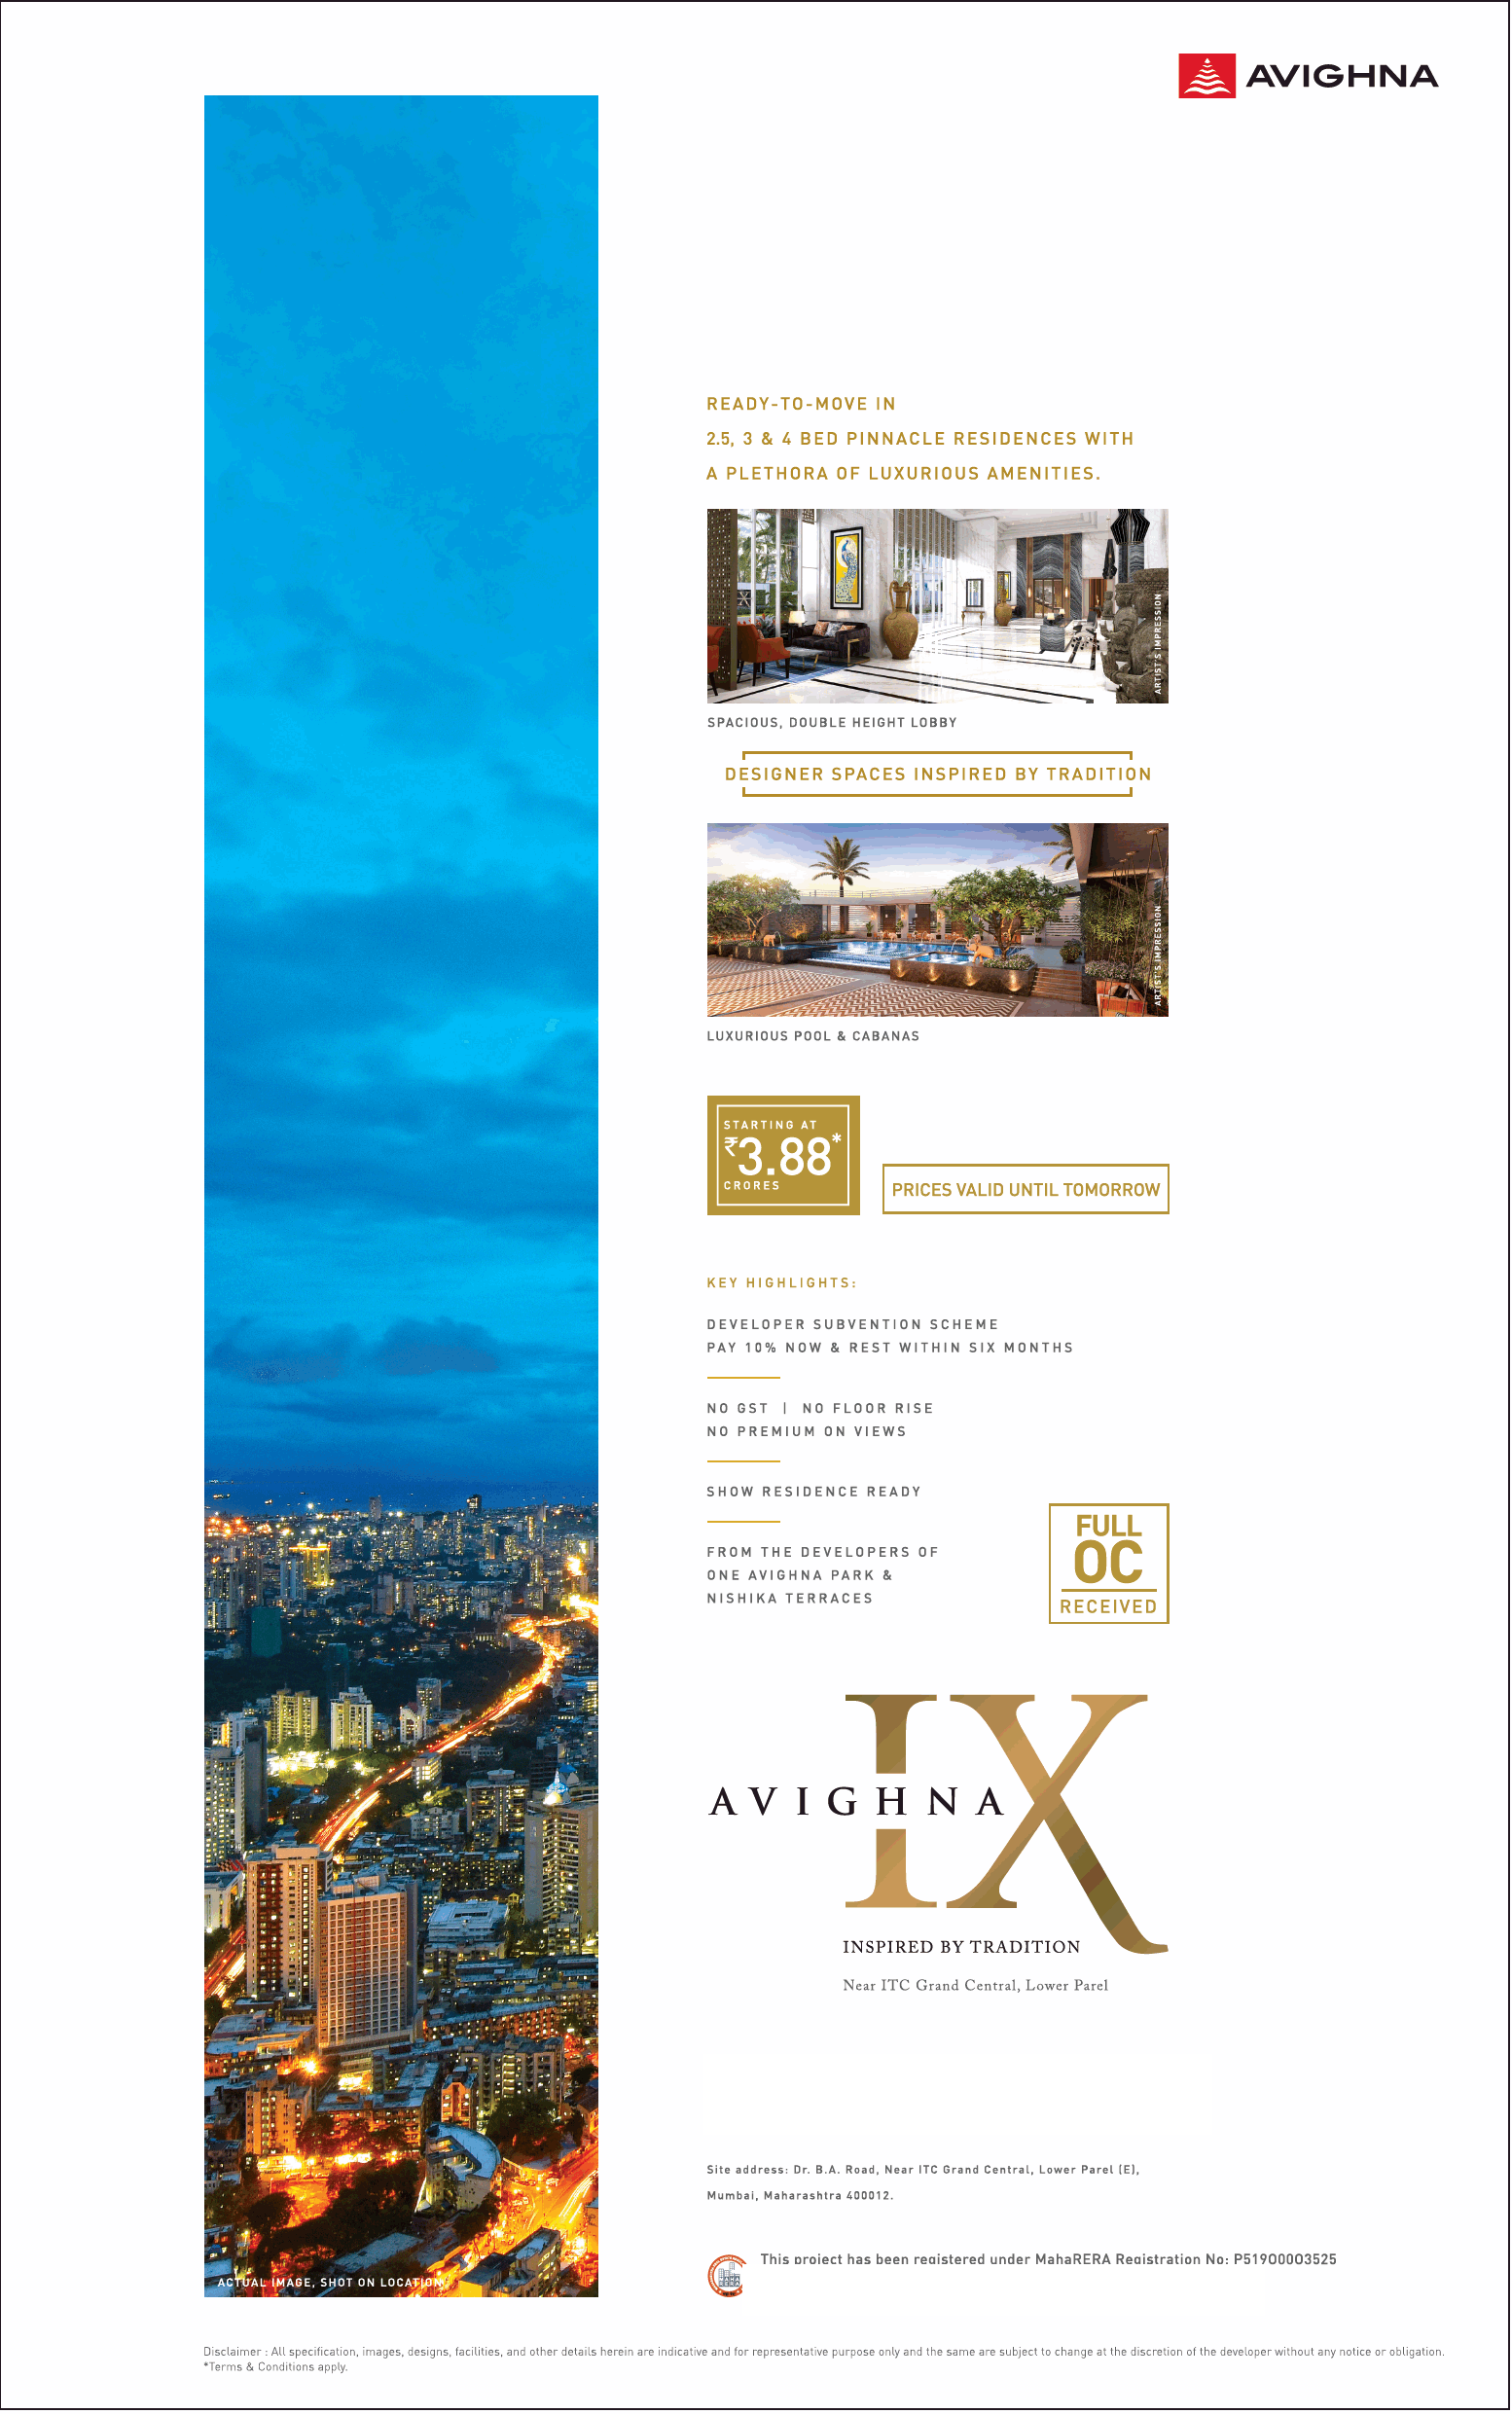 Pay 10% now and rest within six months at Avighna 9 near ITC, Lower Parel, Mumbai Update